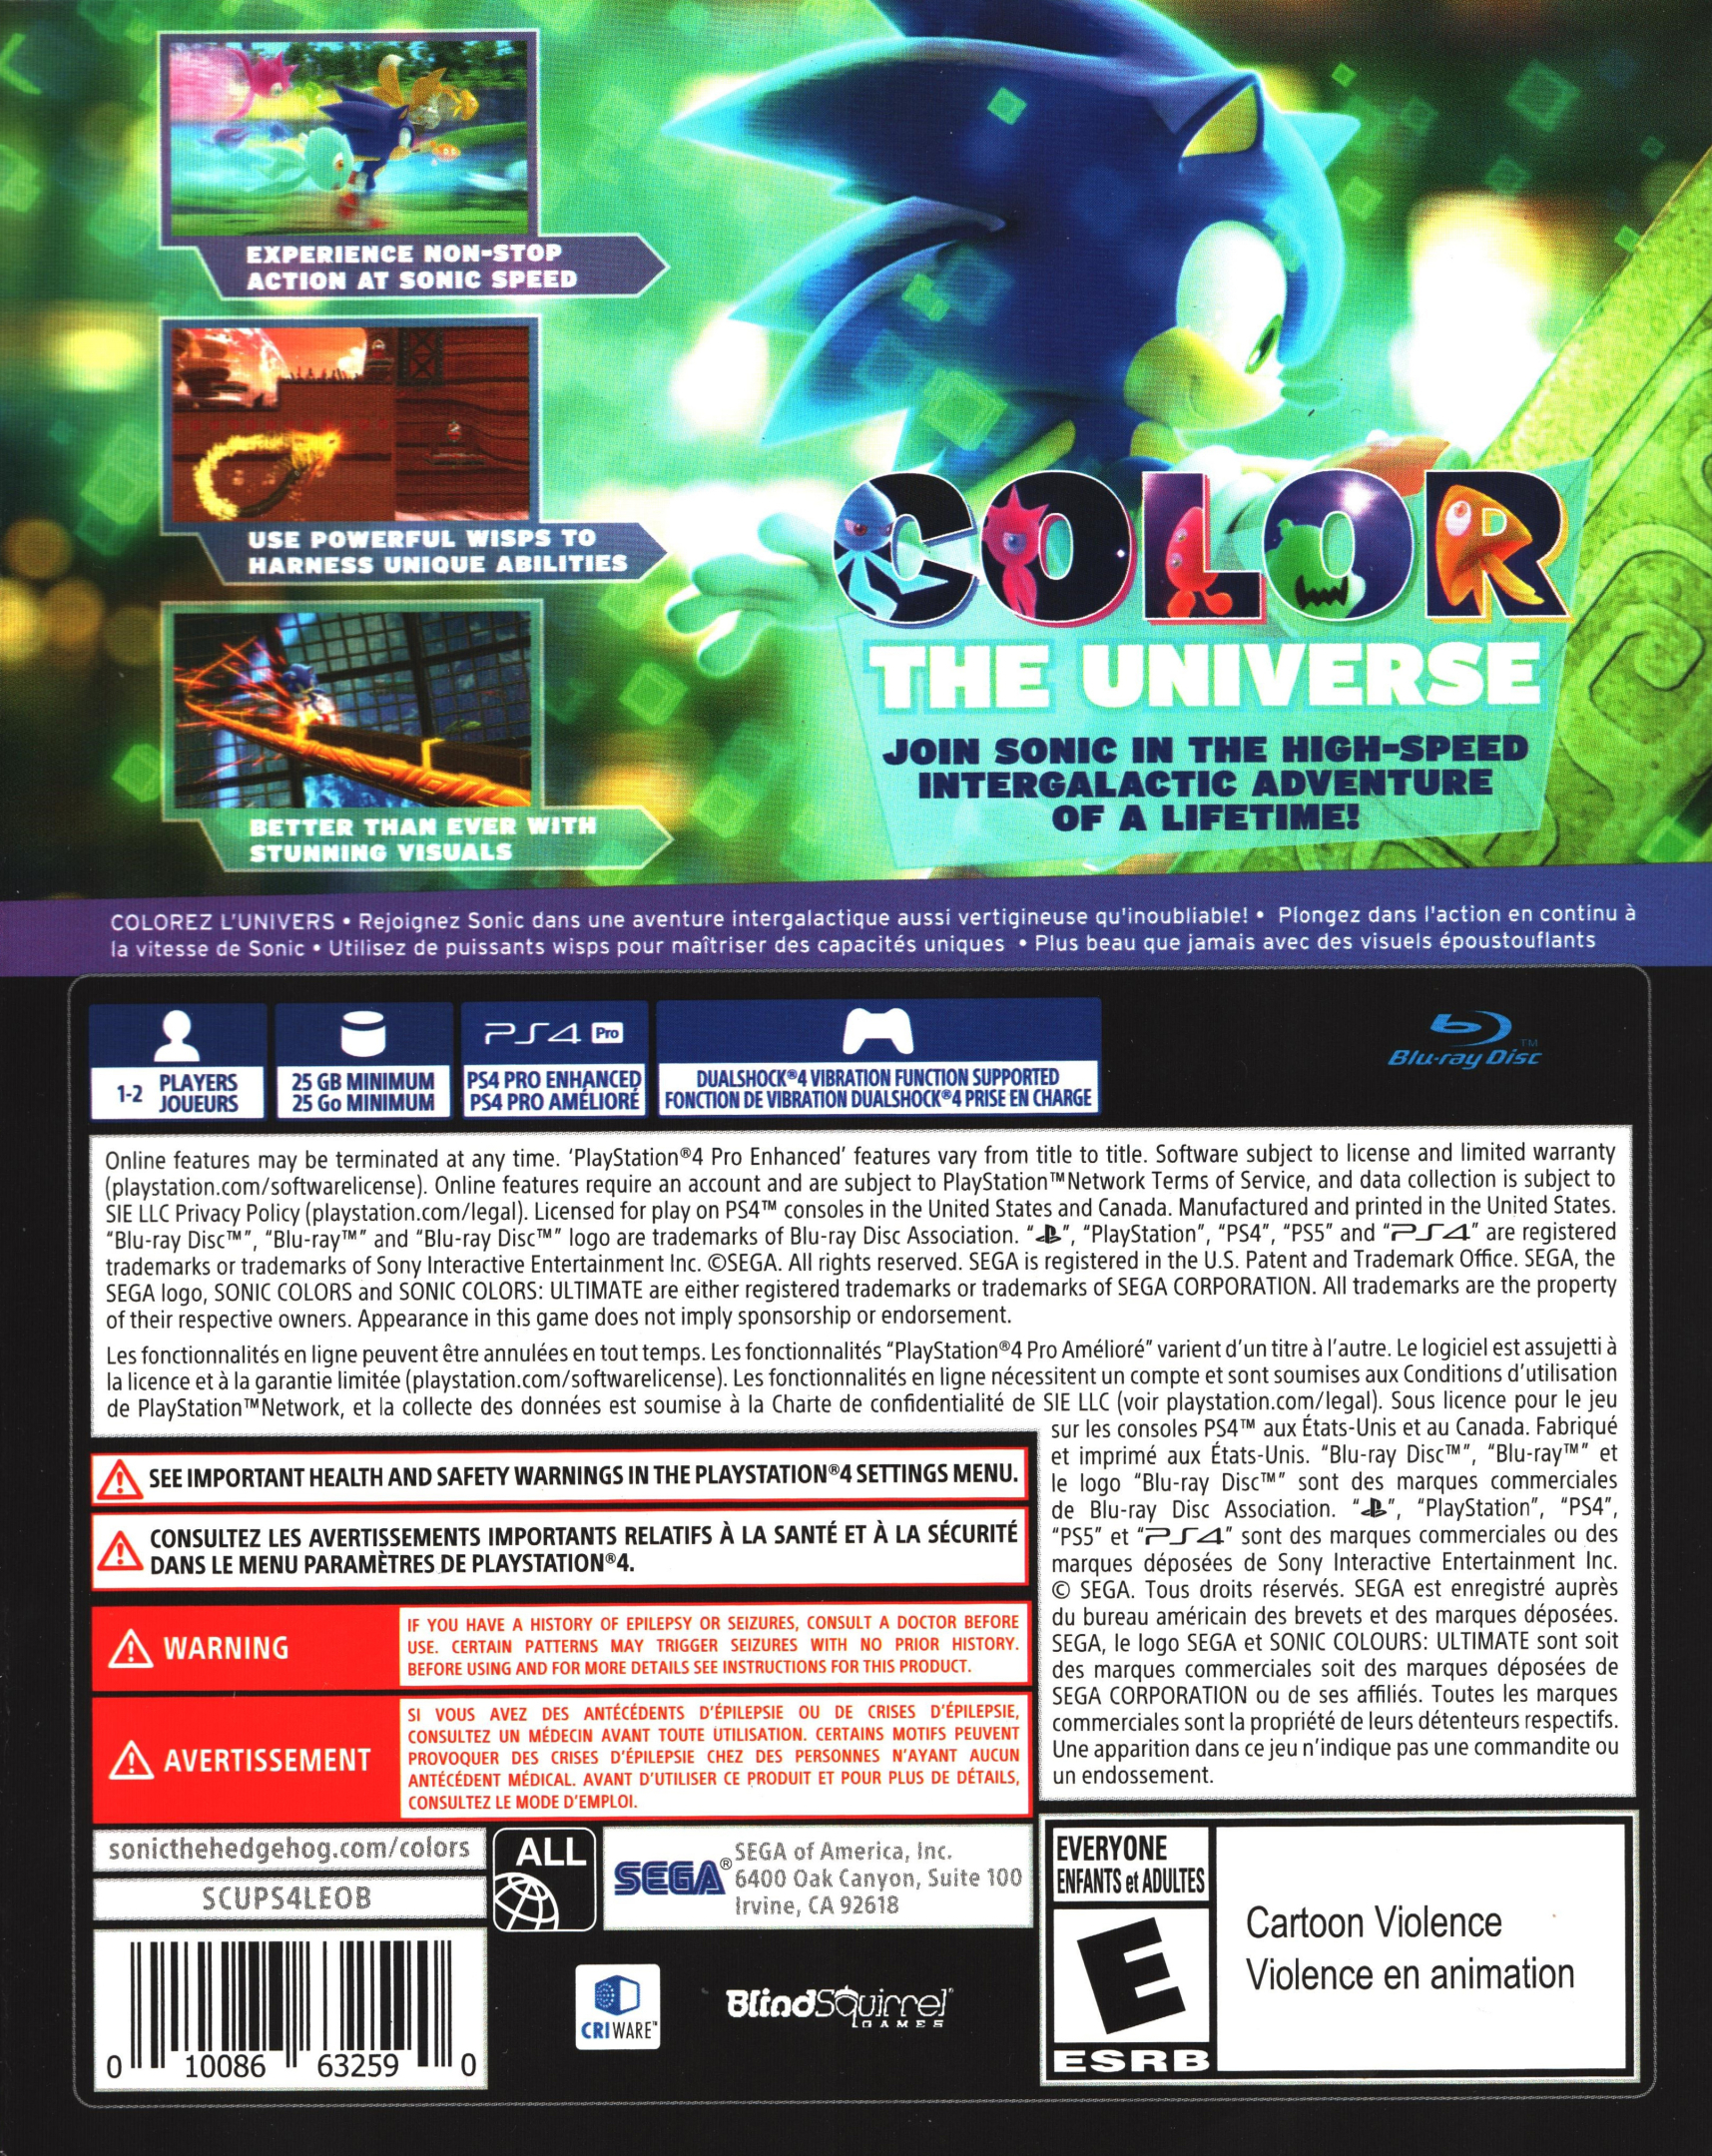 Sonic Colors: Ultimate Box Shot for Nintendo Switch - GameFAQs